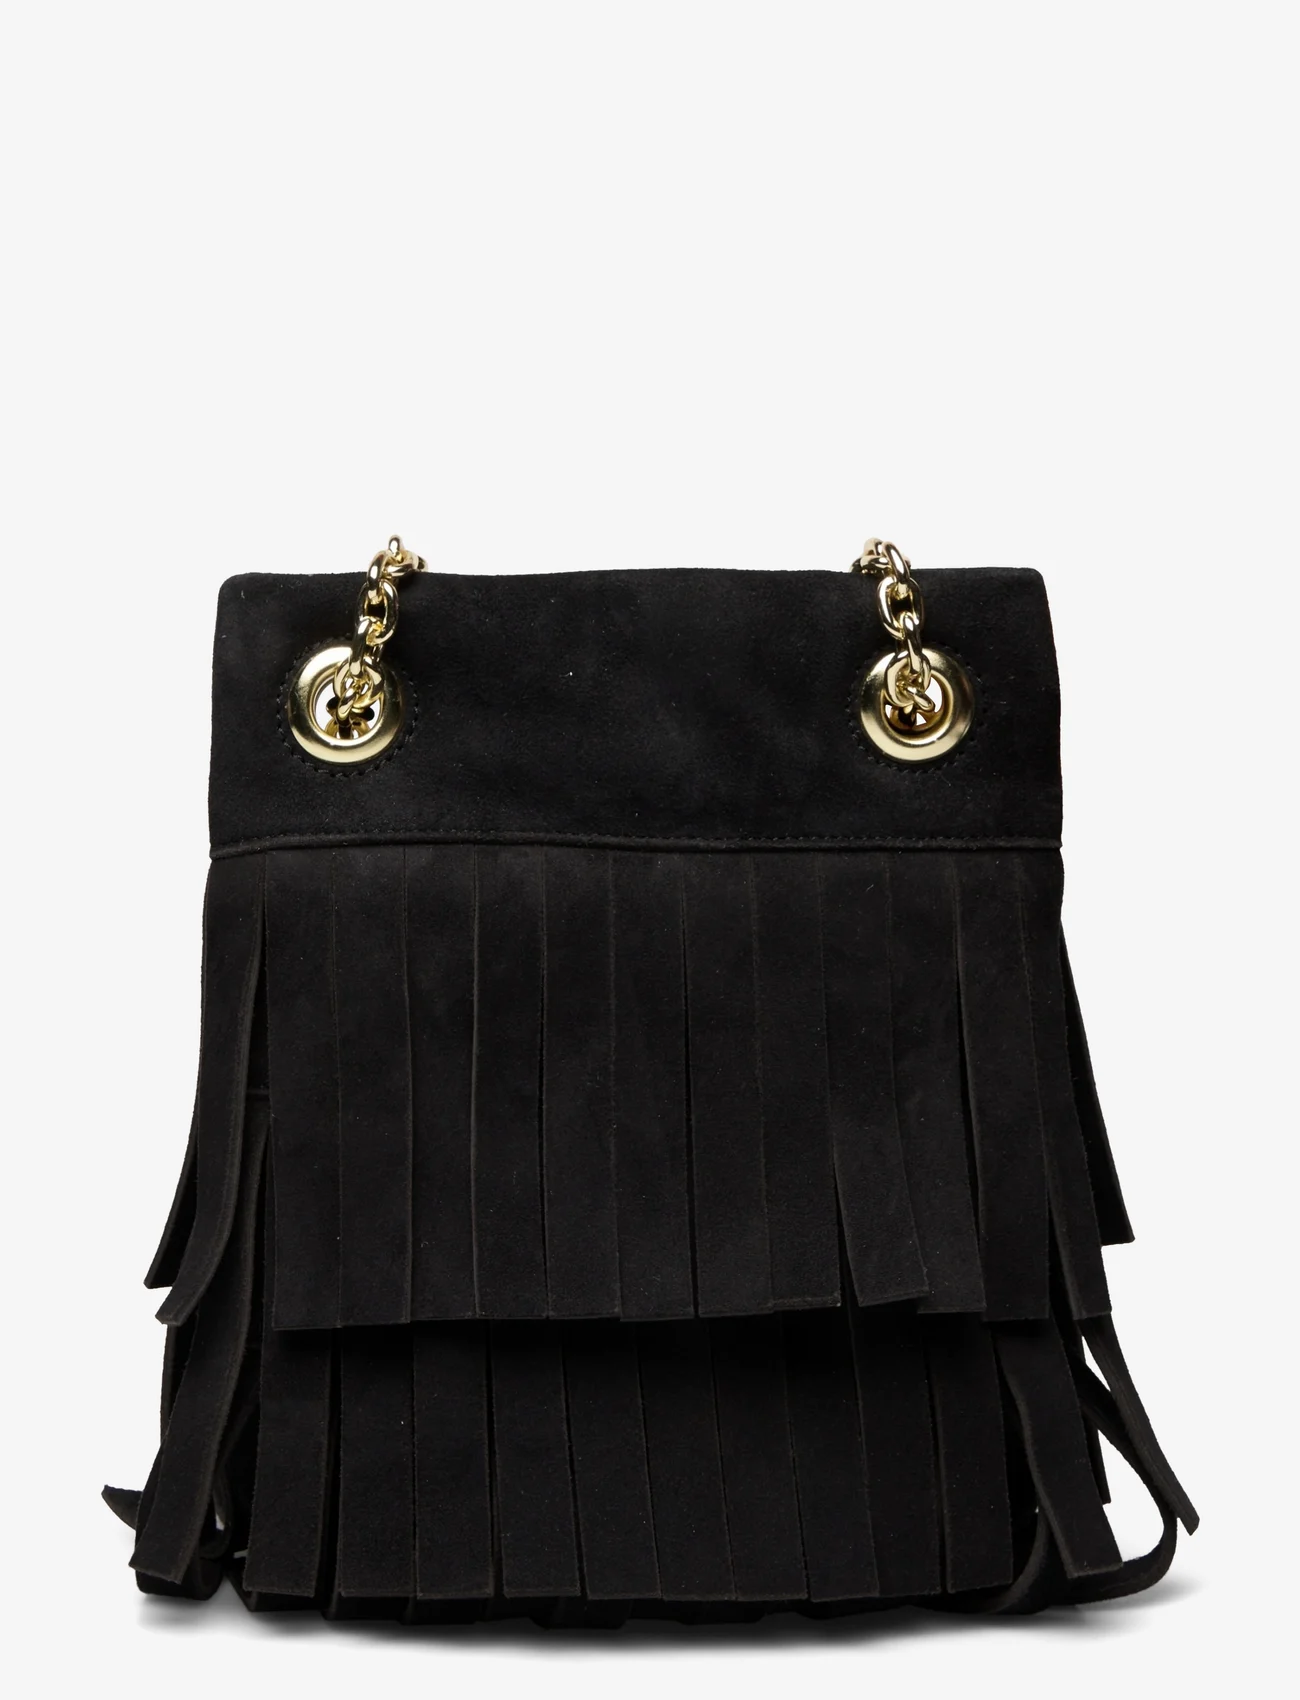 Stand Studio - Rhea Fringe Bag - party wear at outlet prices - black/gold - 1